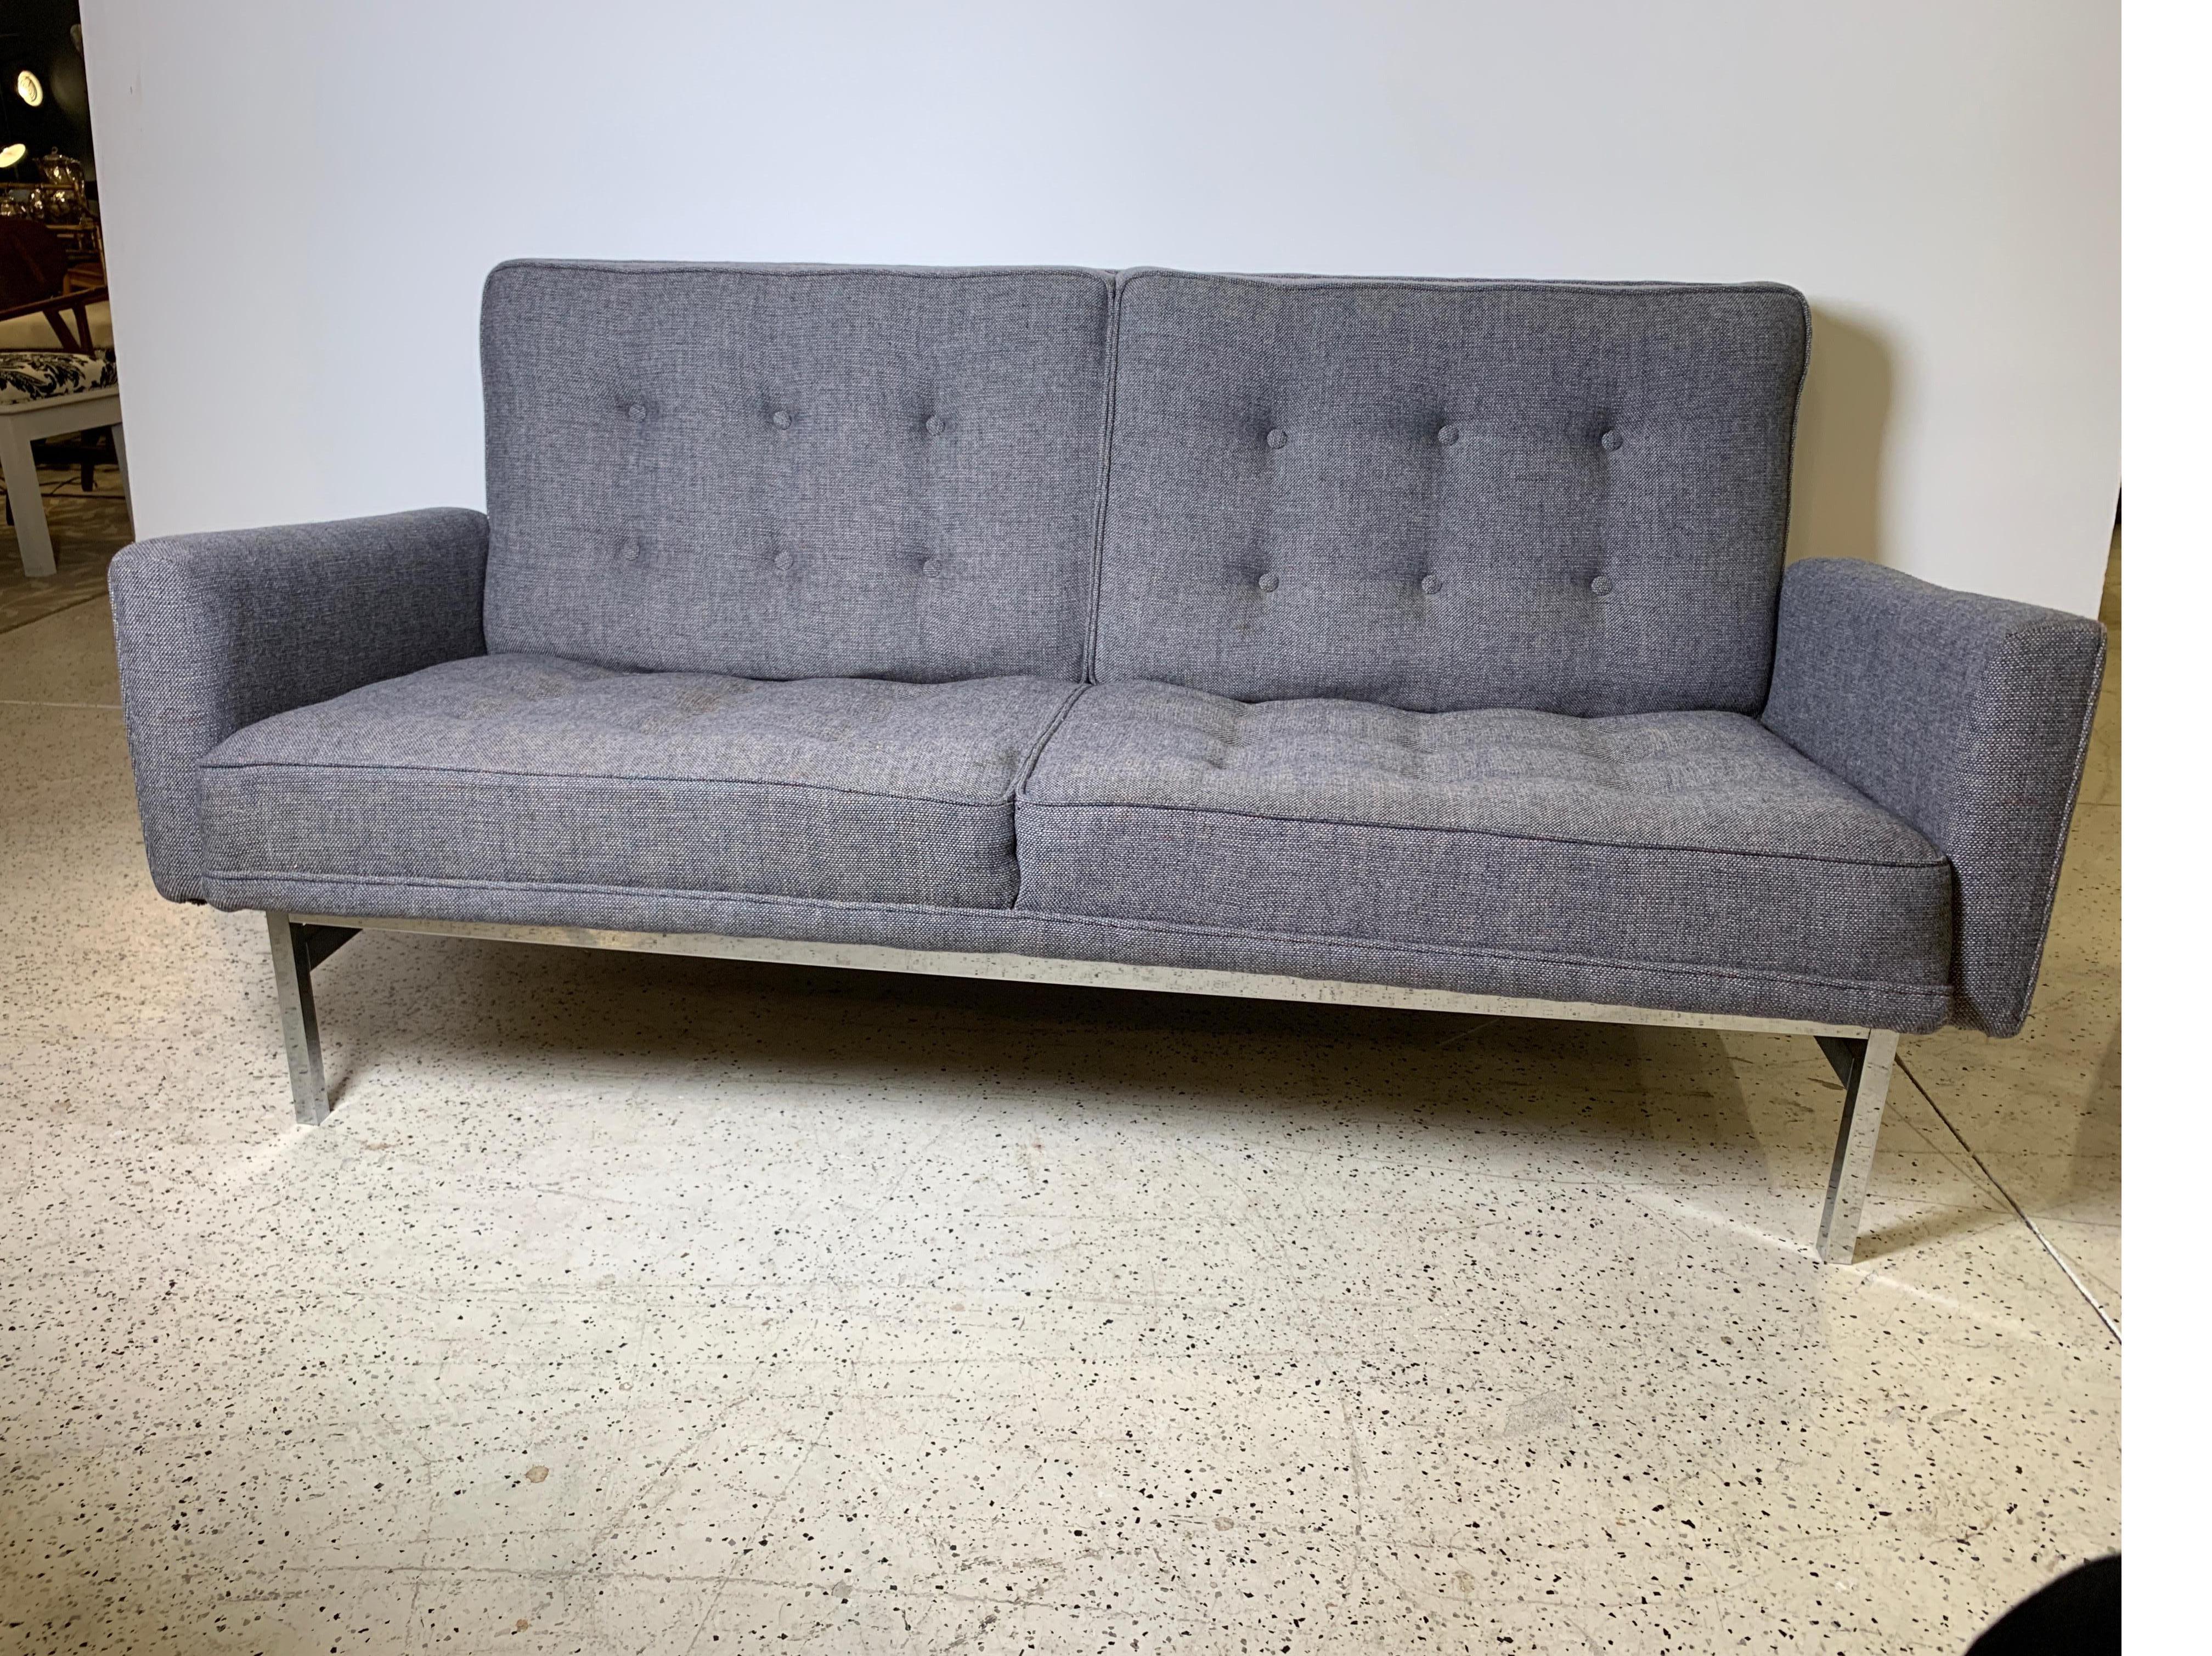 Lovely Florence Knoll sofa, configured with two seats and arms. This model is most often seen armless.